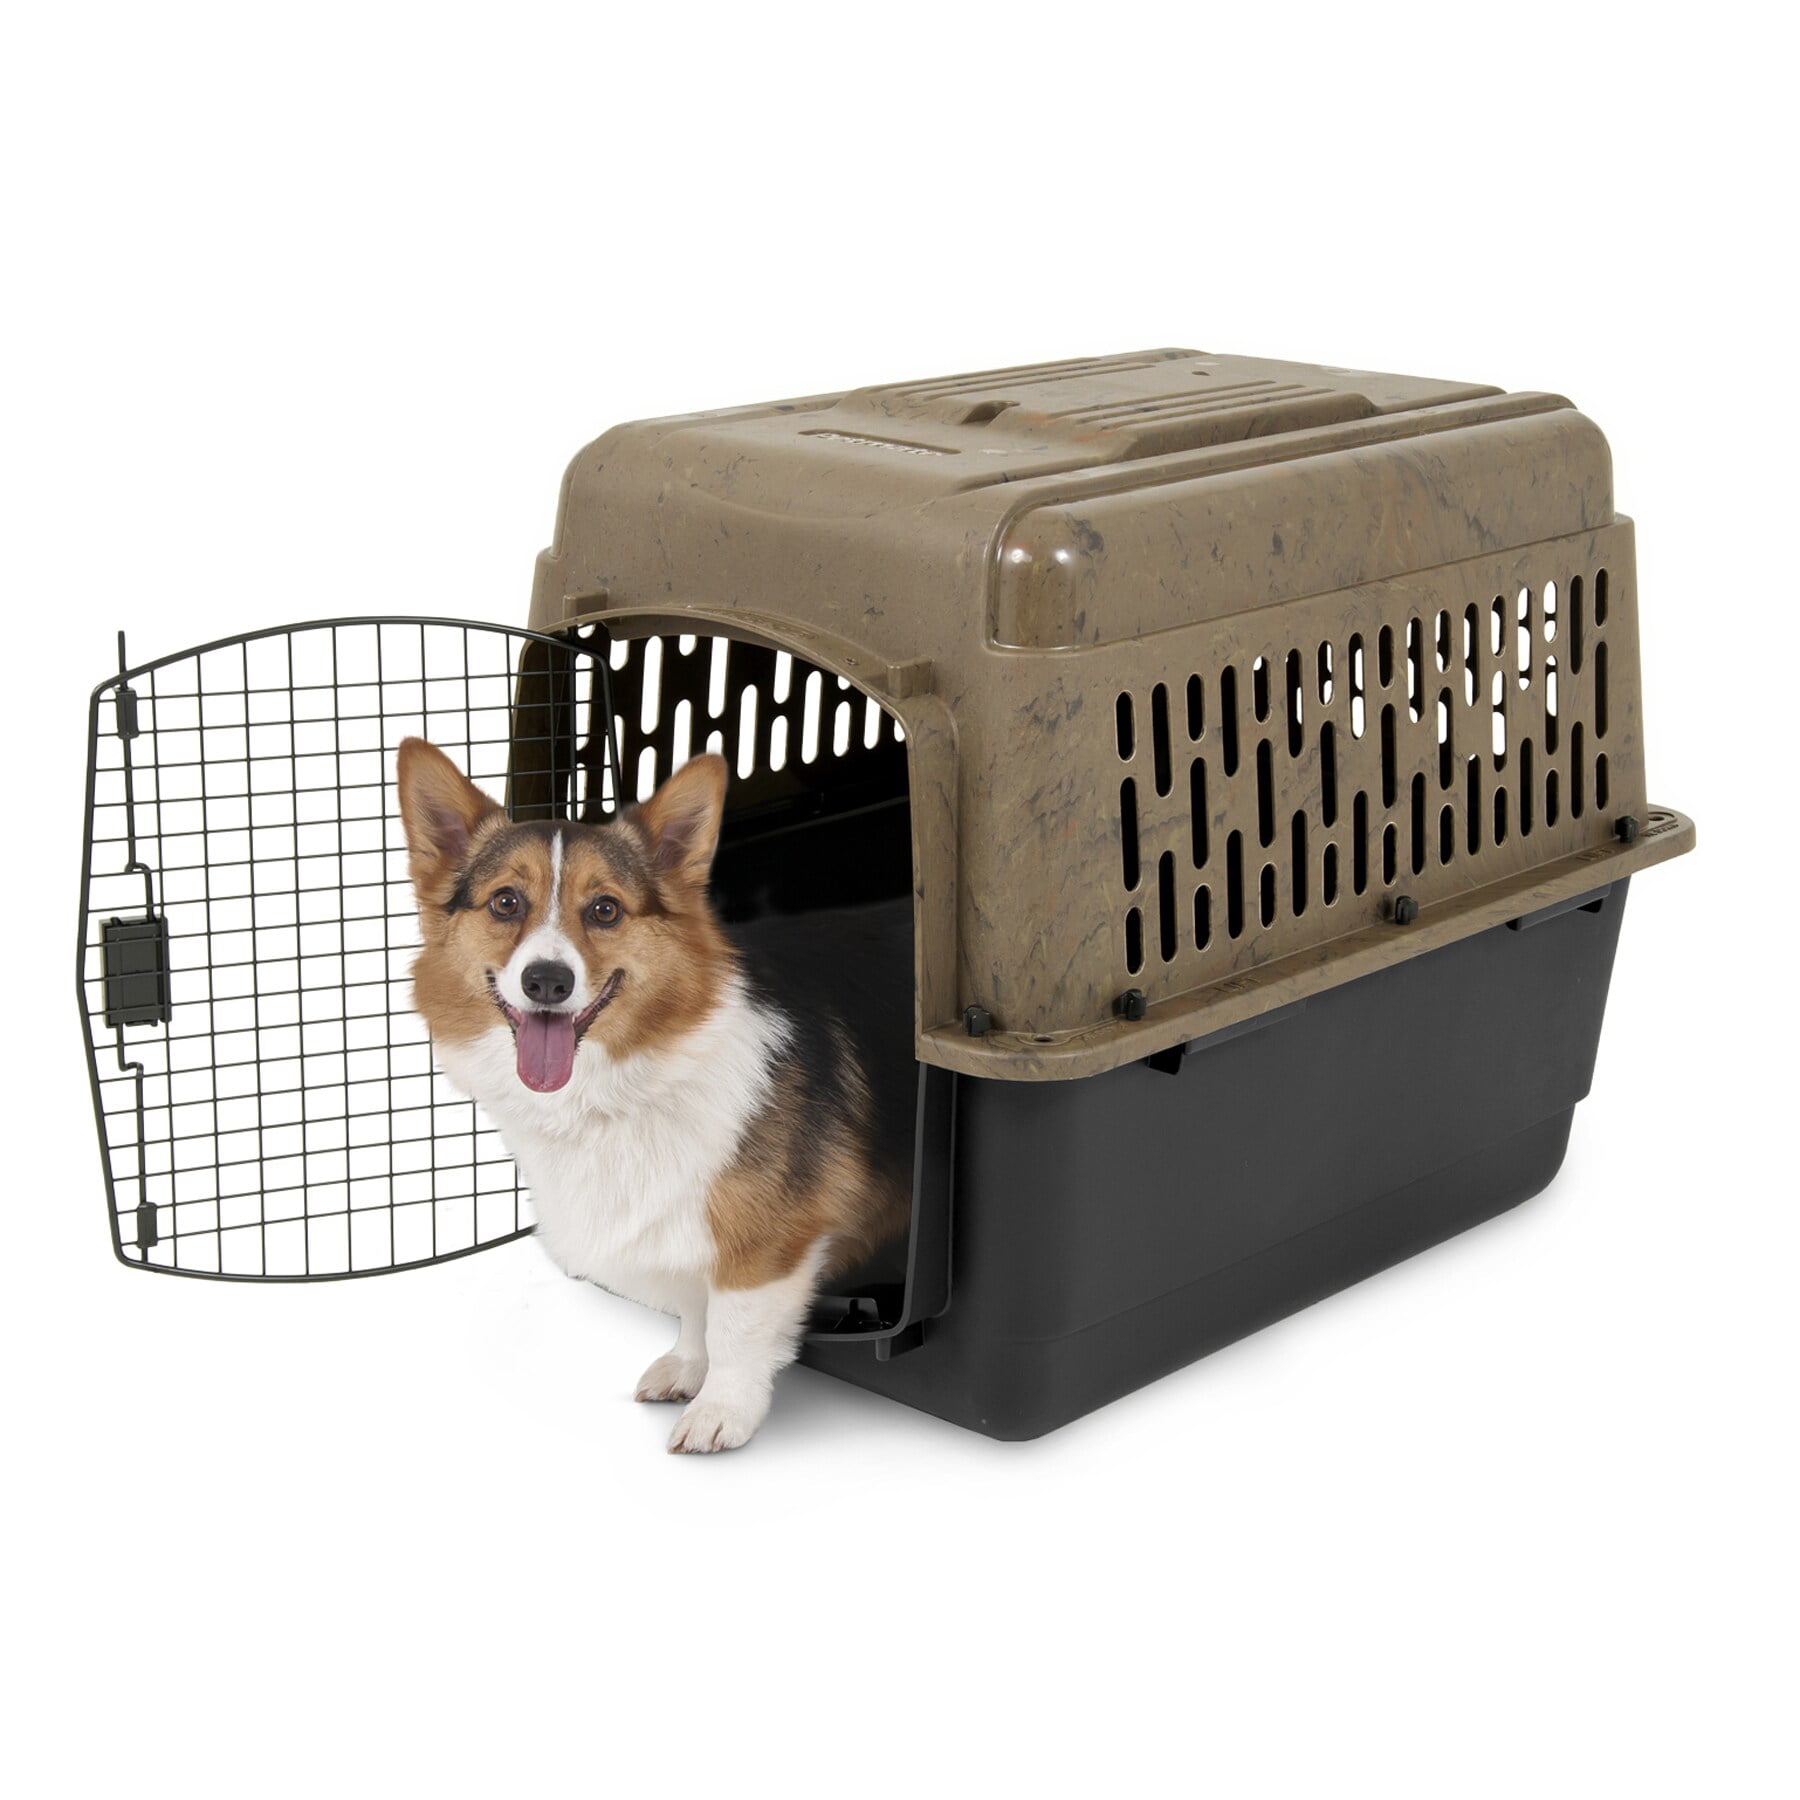 Petmate Ruffmaxx Plastic Dog Kennel, 40 inch Length, for Dogs 70-90 Pounds,  Tan/Green 